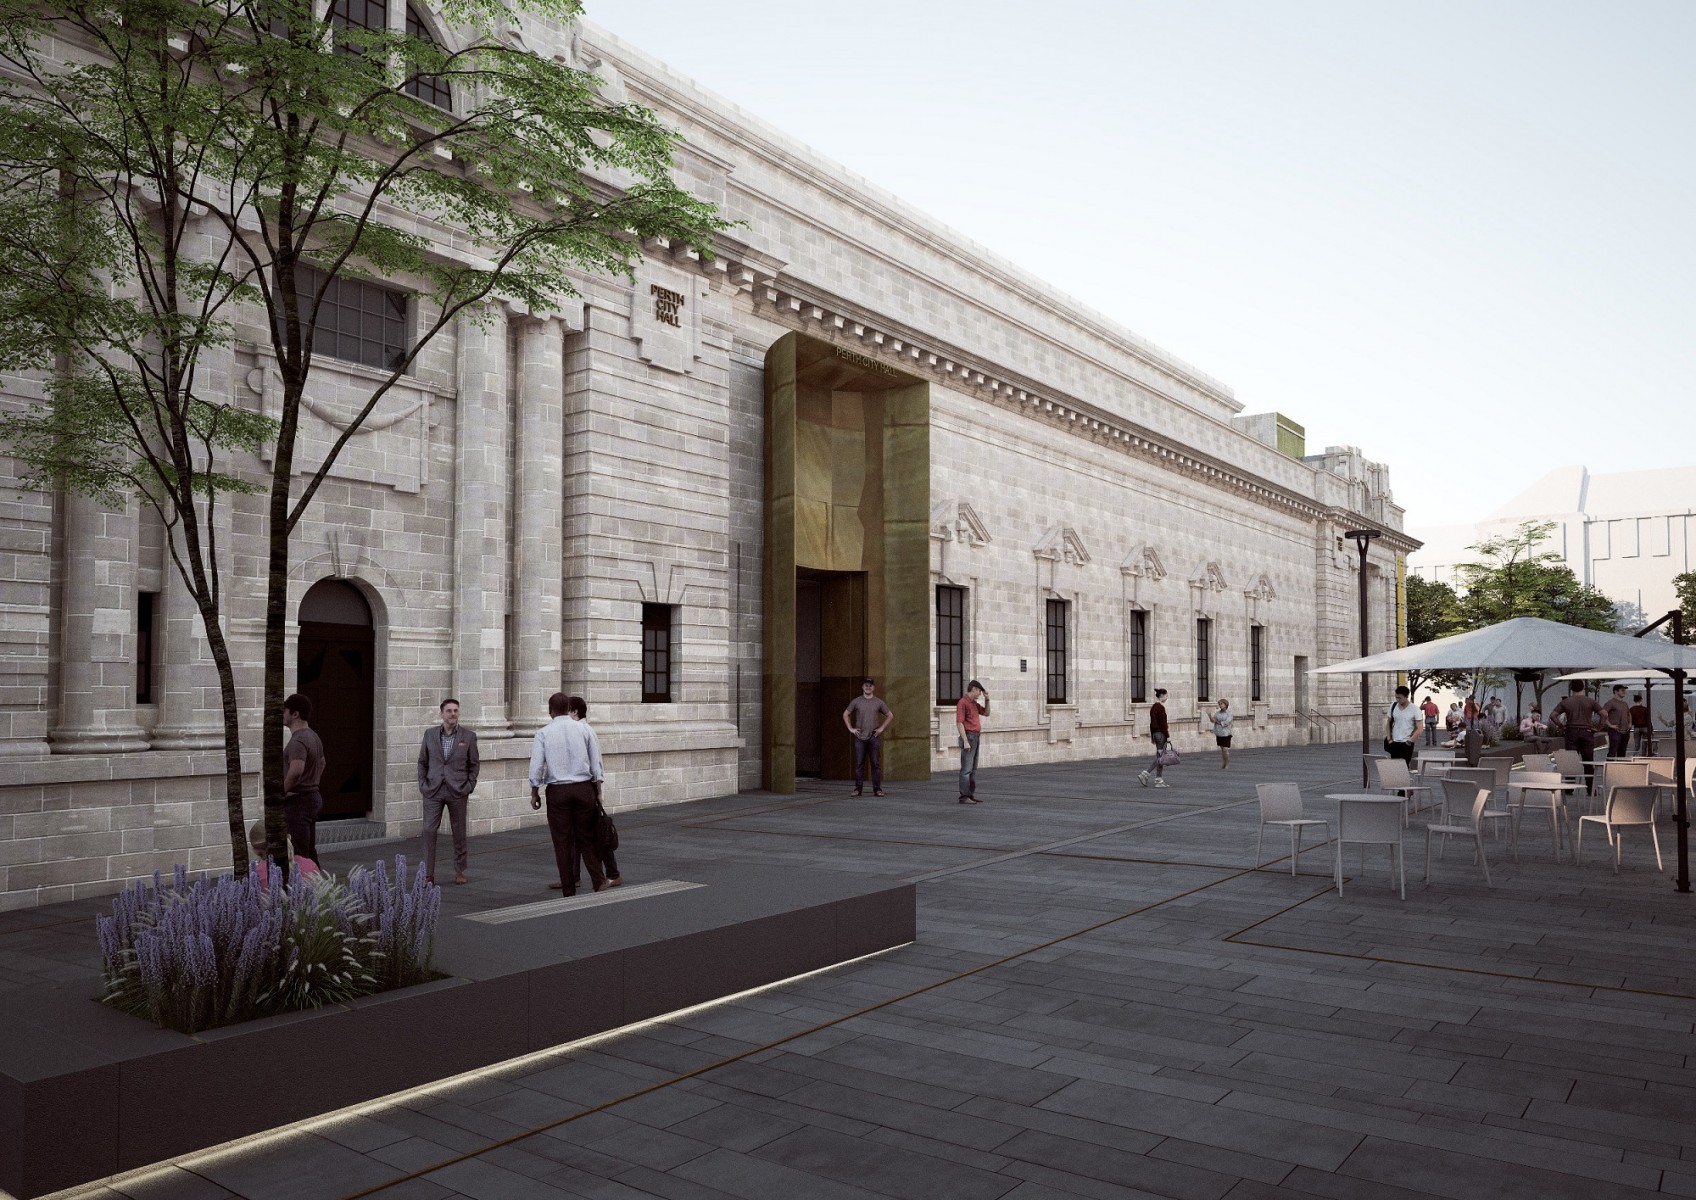 Perth City Hall transformation plan gets final approval